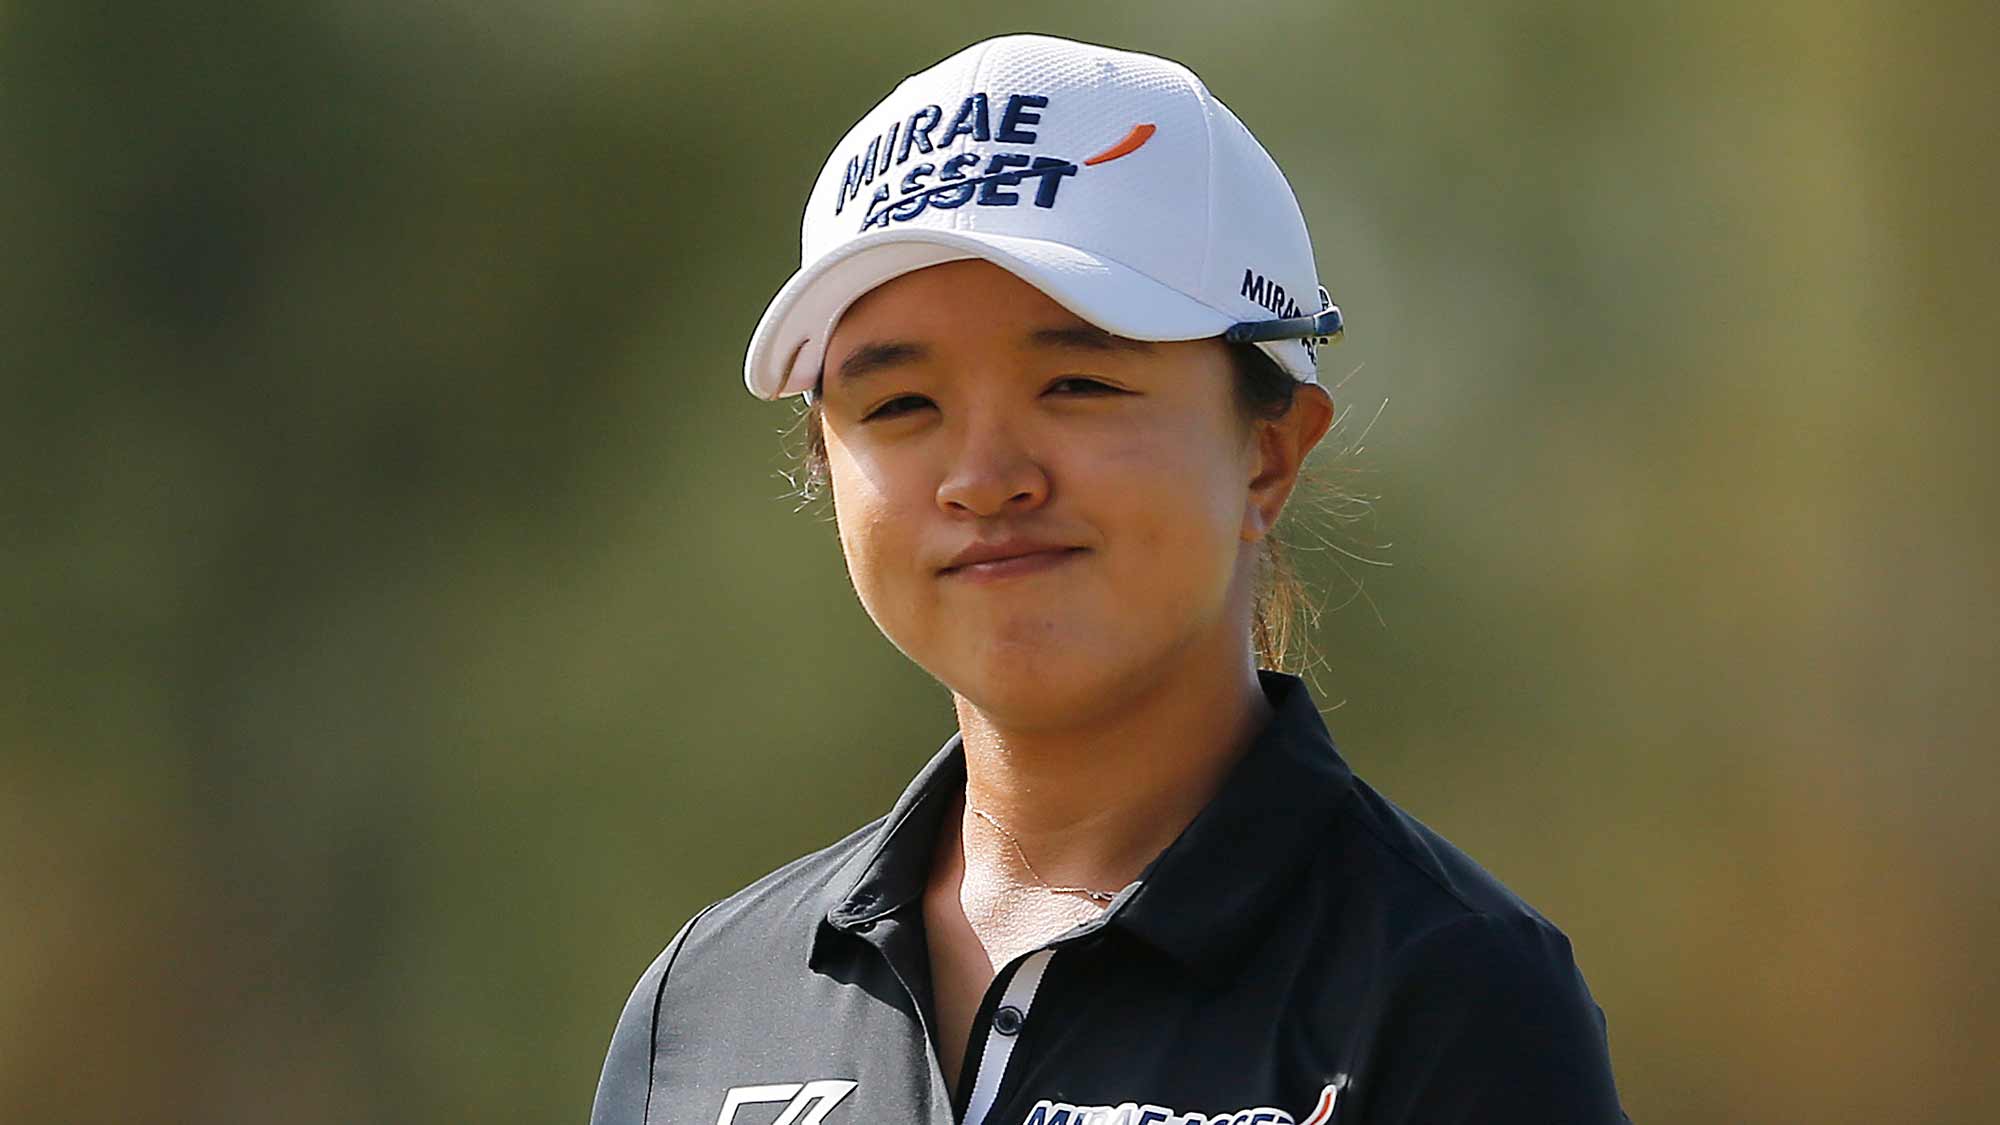 Sei Young Kim of South Korea reacts after a putt on the first green during the final round of the CME Group Tour Championship at Tiburon Golf Club on November 24, 2019 in Naples, Florida